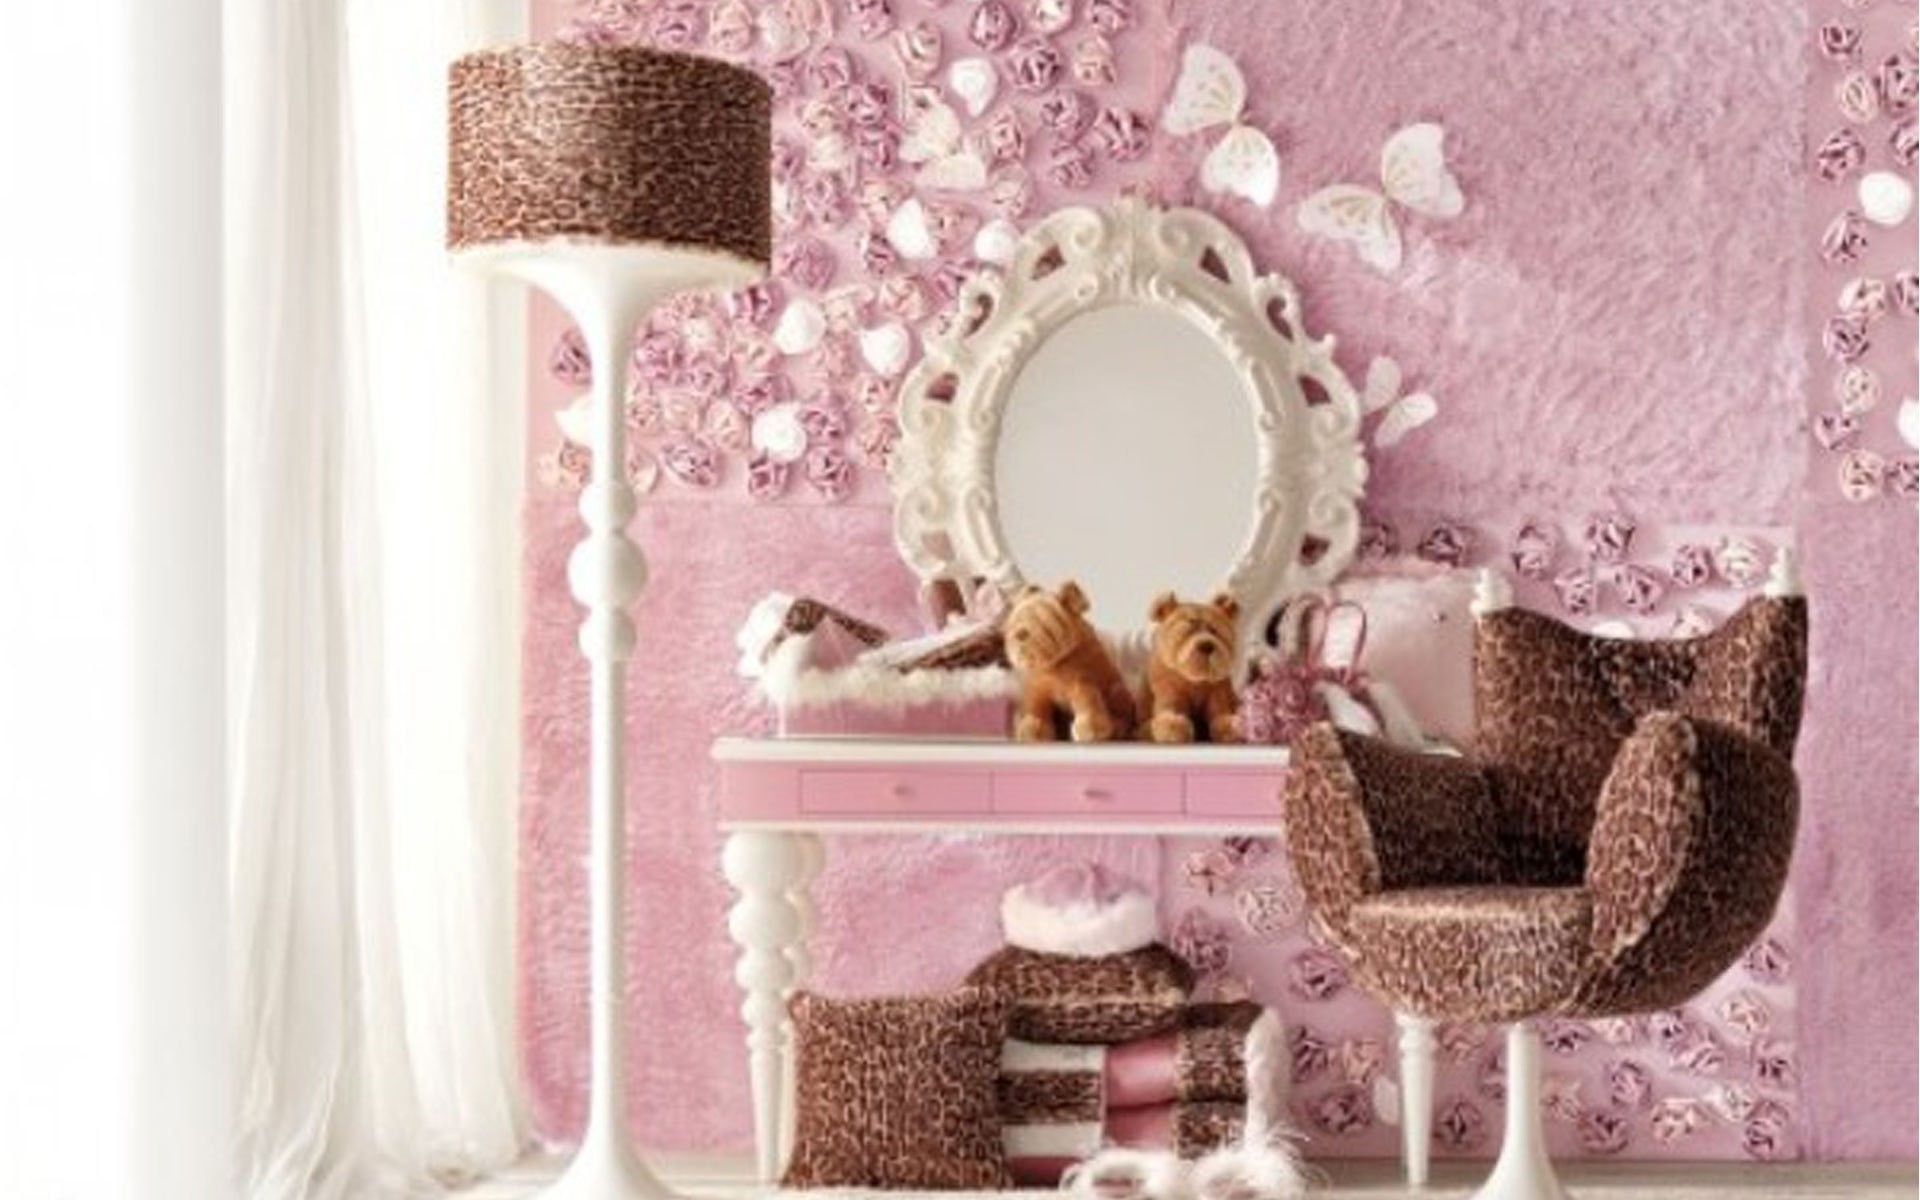 1920x1200 Cute Teenage Wall Decor Www Unique Baby Gear Ideas Com Images And Picture  Ofpink Decoration In ...